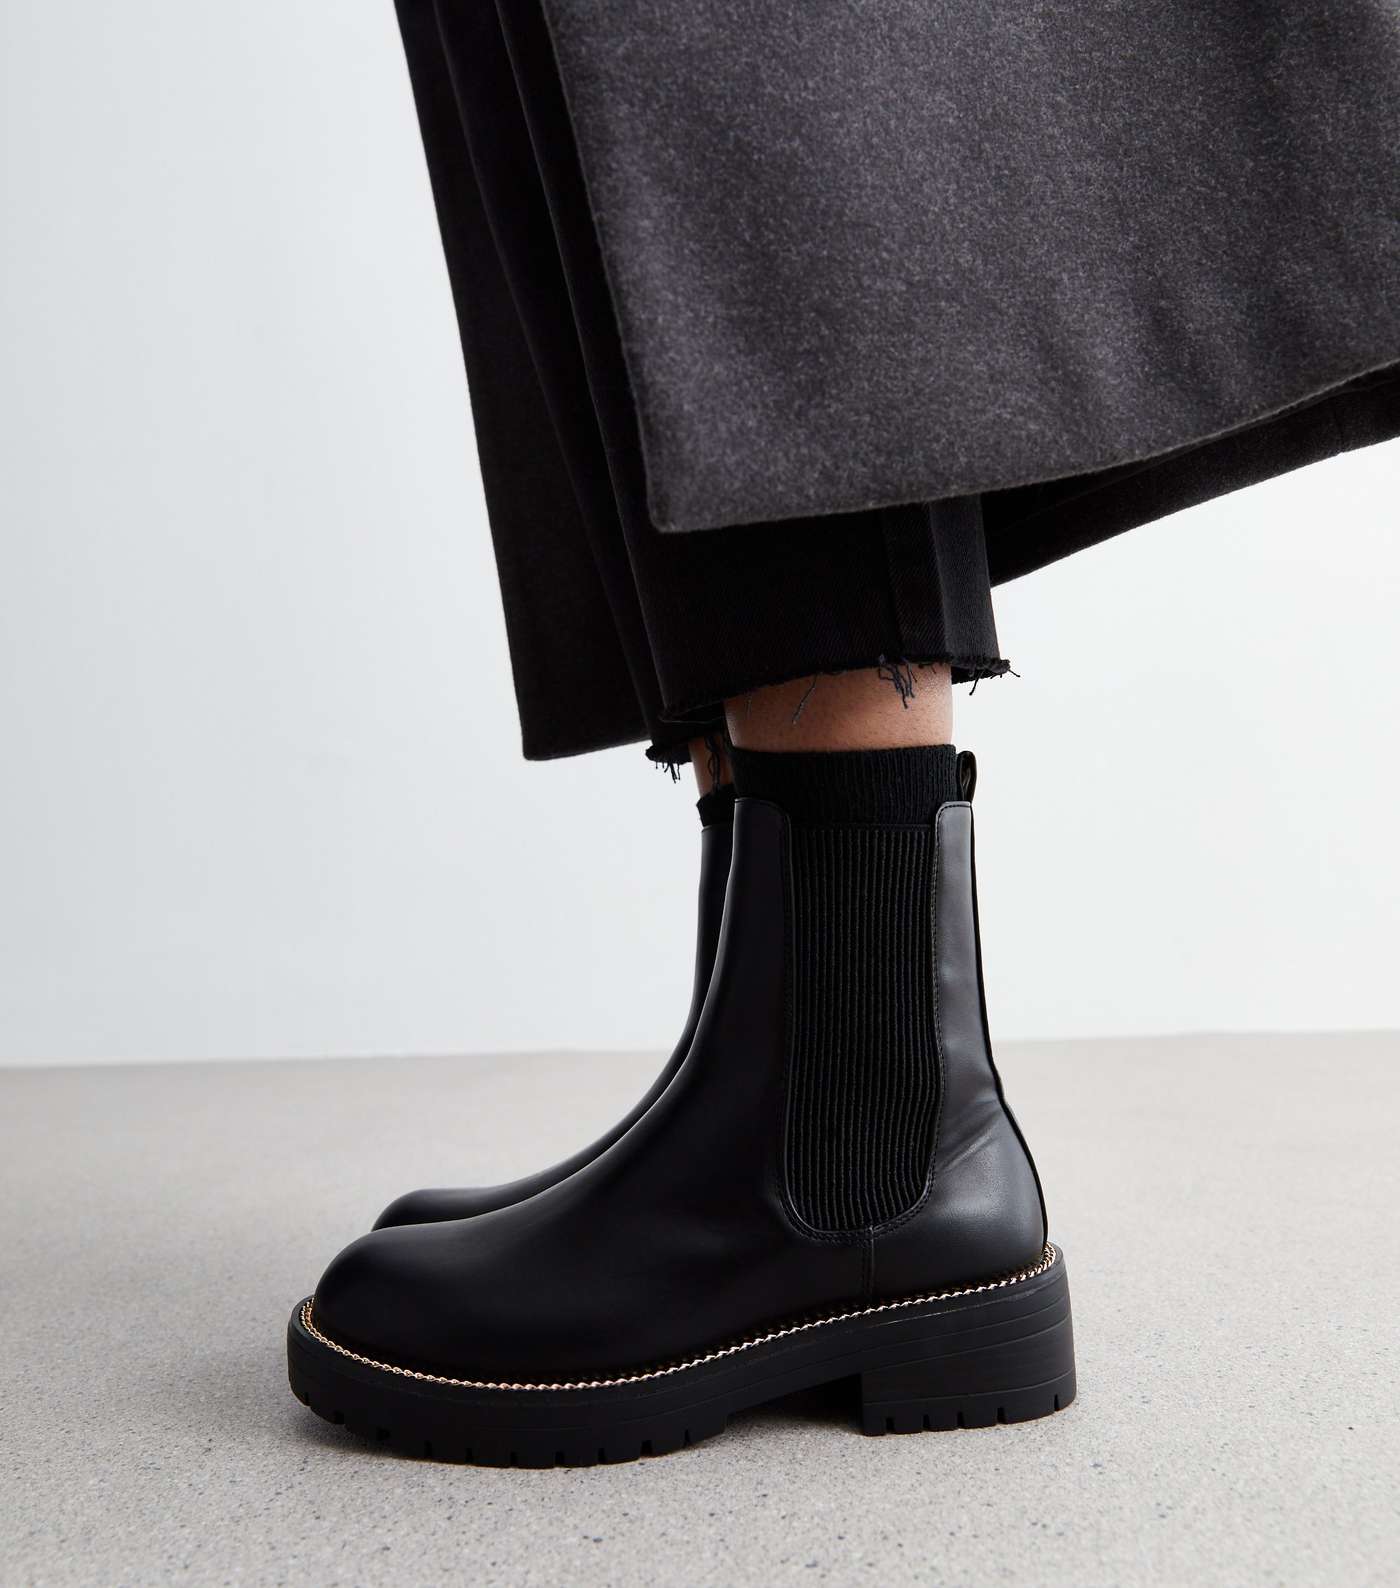 Black Leather-Look Gold Trim Chelsea Boots Image 2